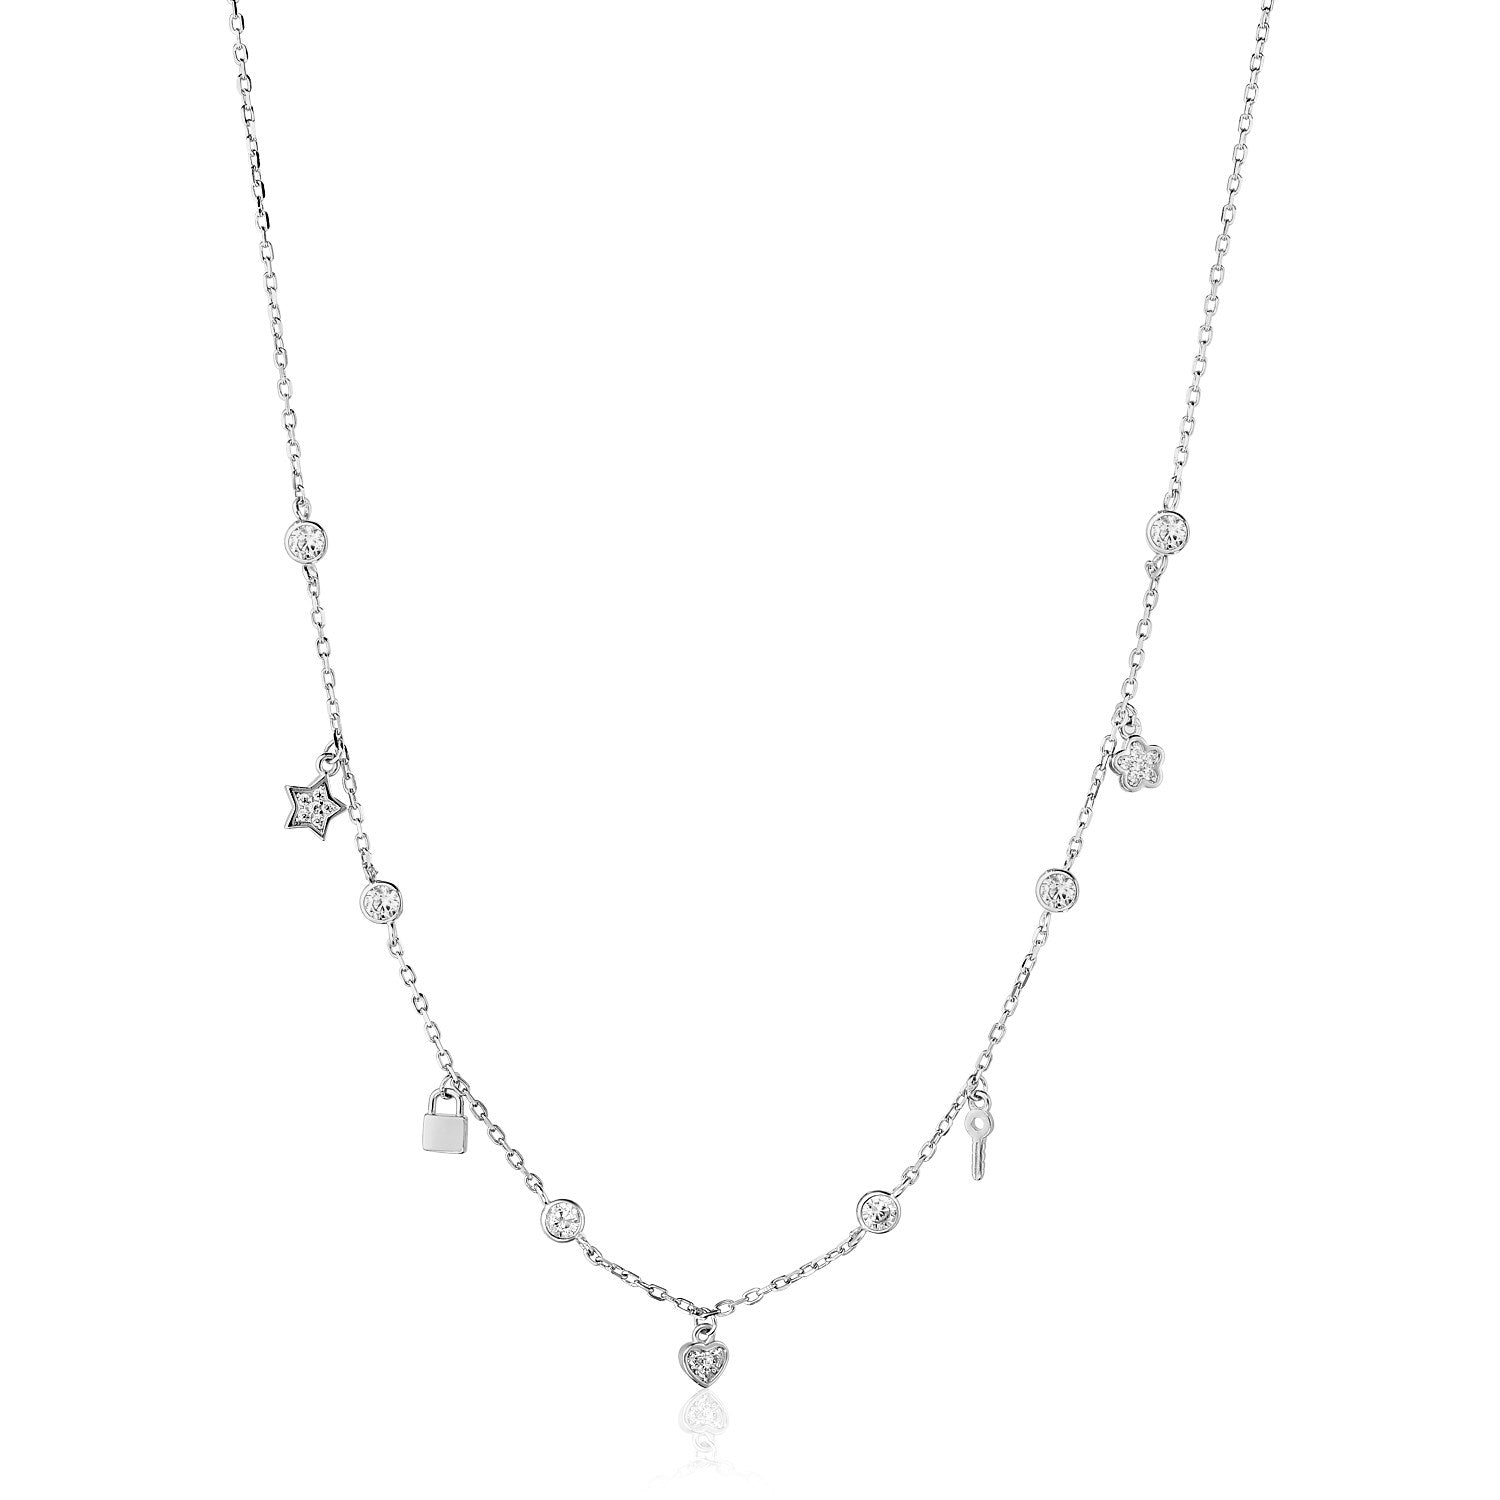 Sterling Silver 18 inch Necklace with Novelty Dangles and Cubic Zicronias